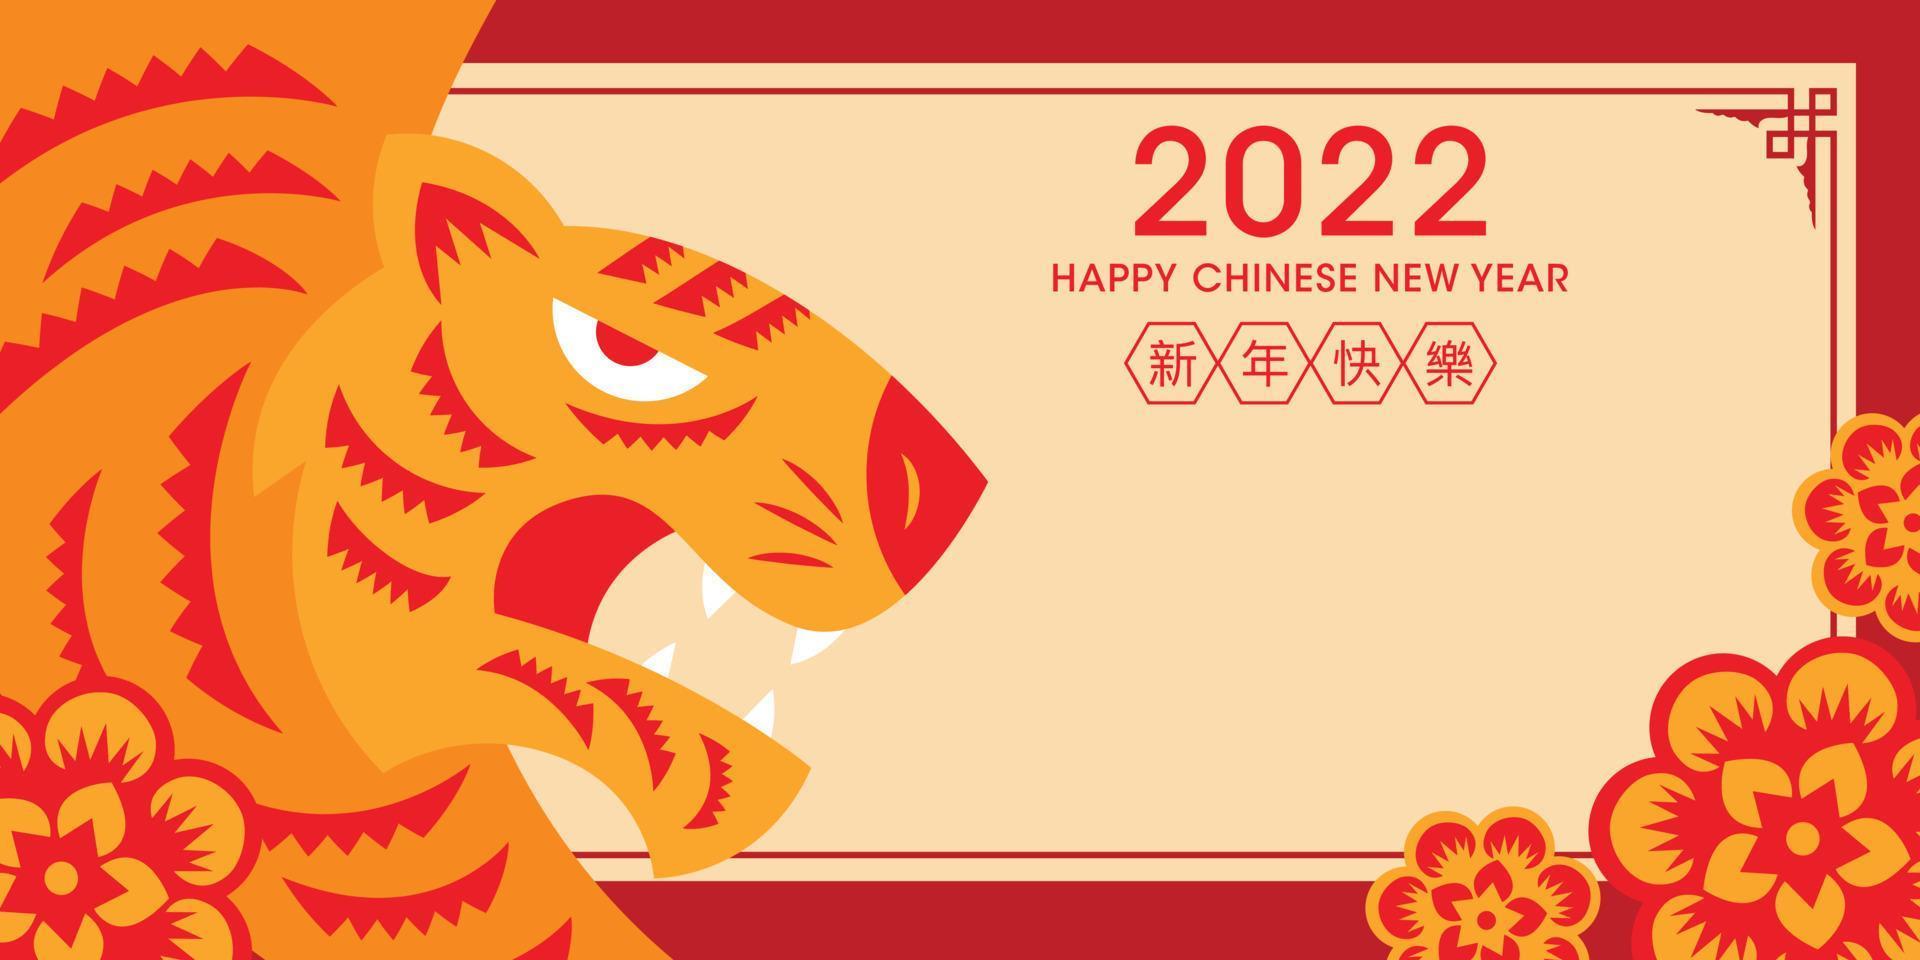 Chinese New Year 2022. Year of the tiger. Paper cut of tiger symbol and oriental floral ornaments with copy space on greeting card banner vector